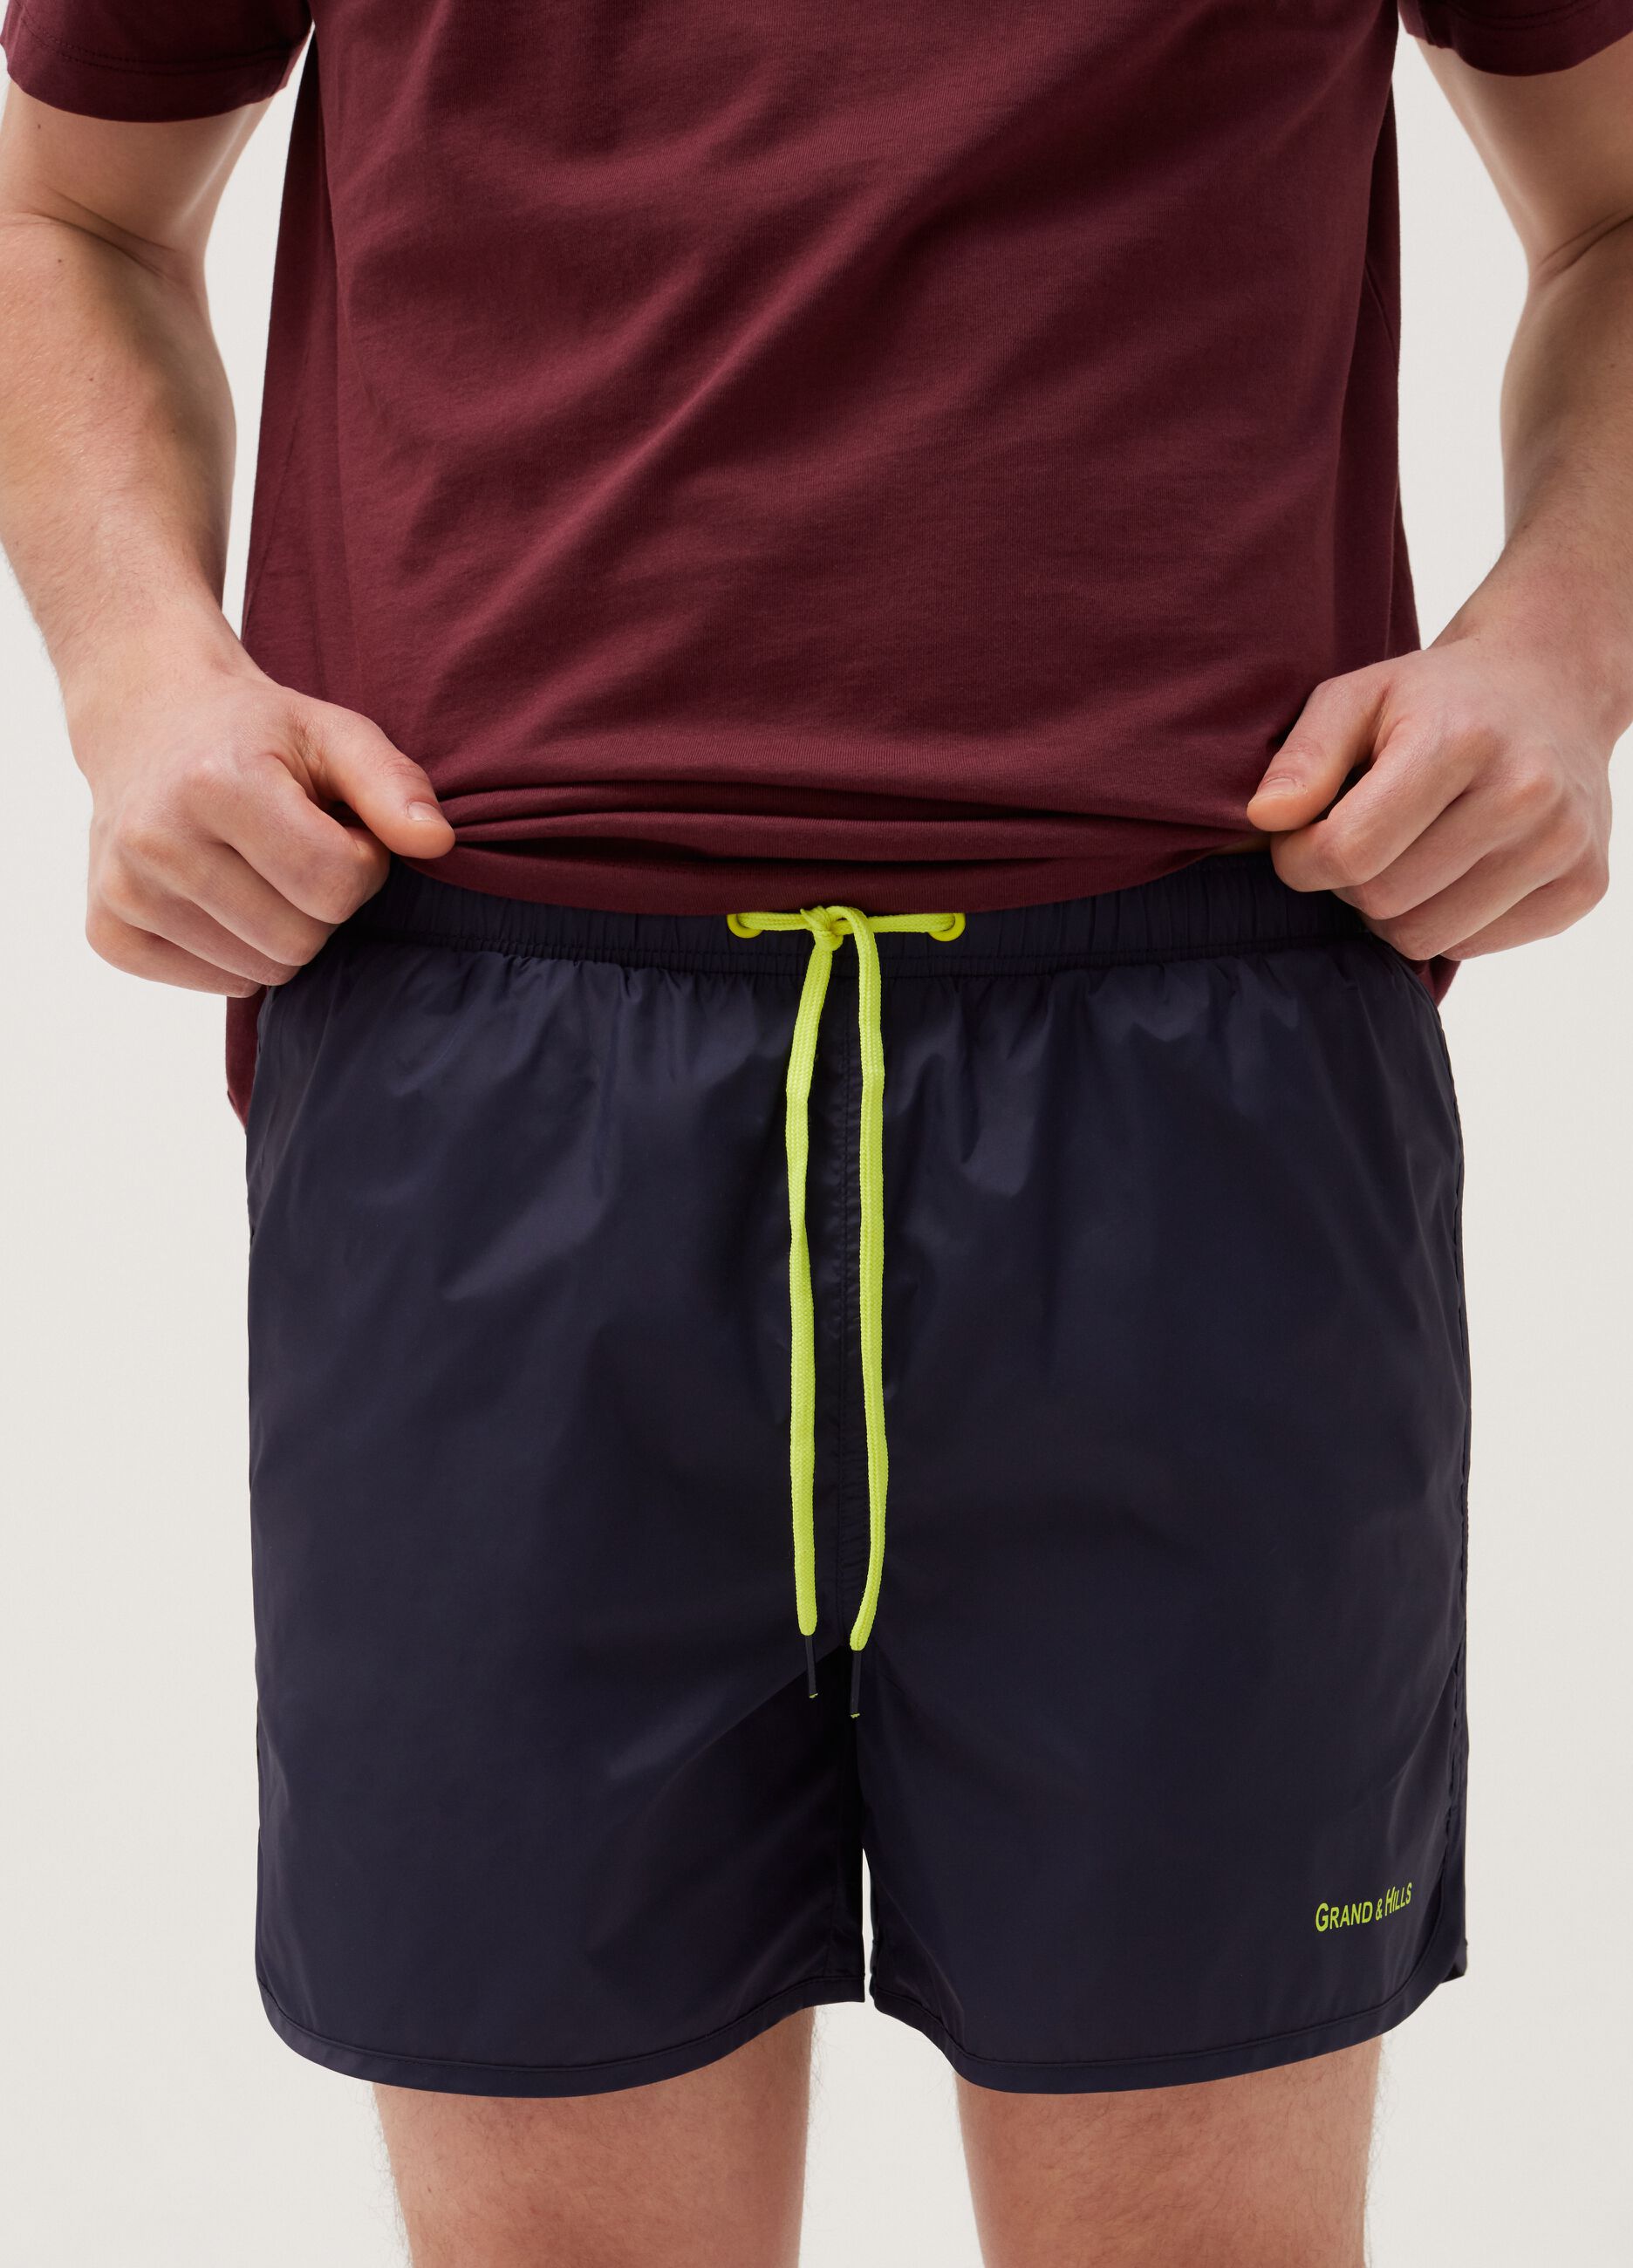 Swimming trunks with drawstring and logo